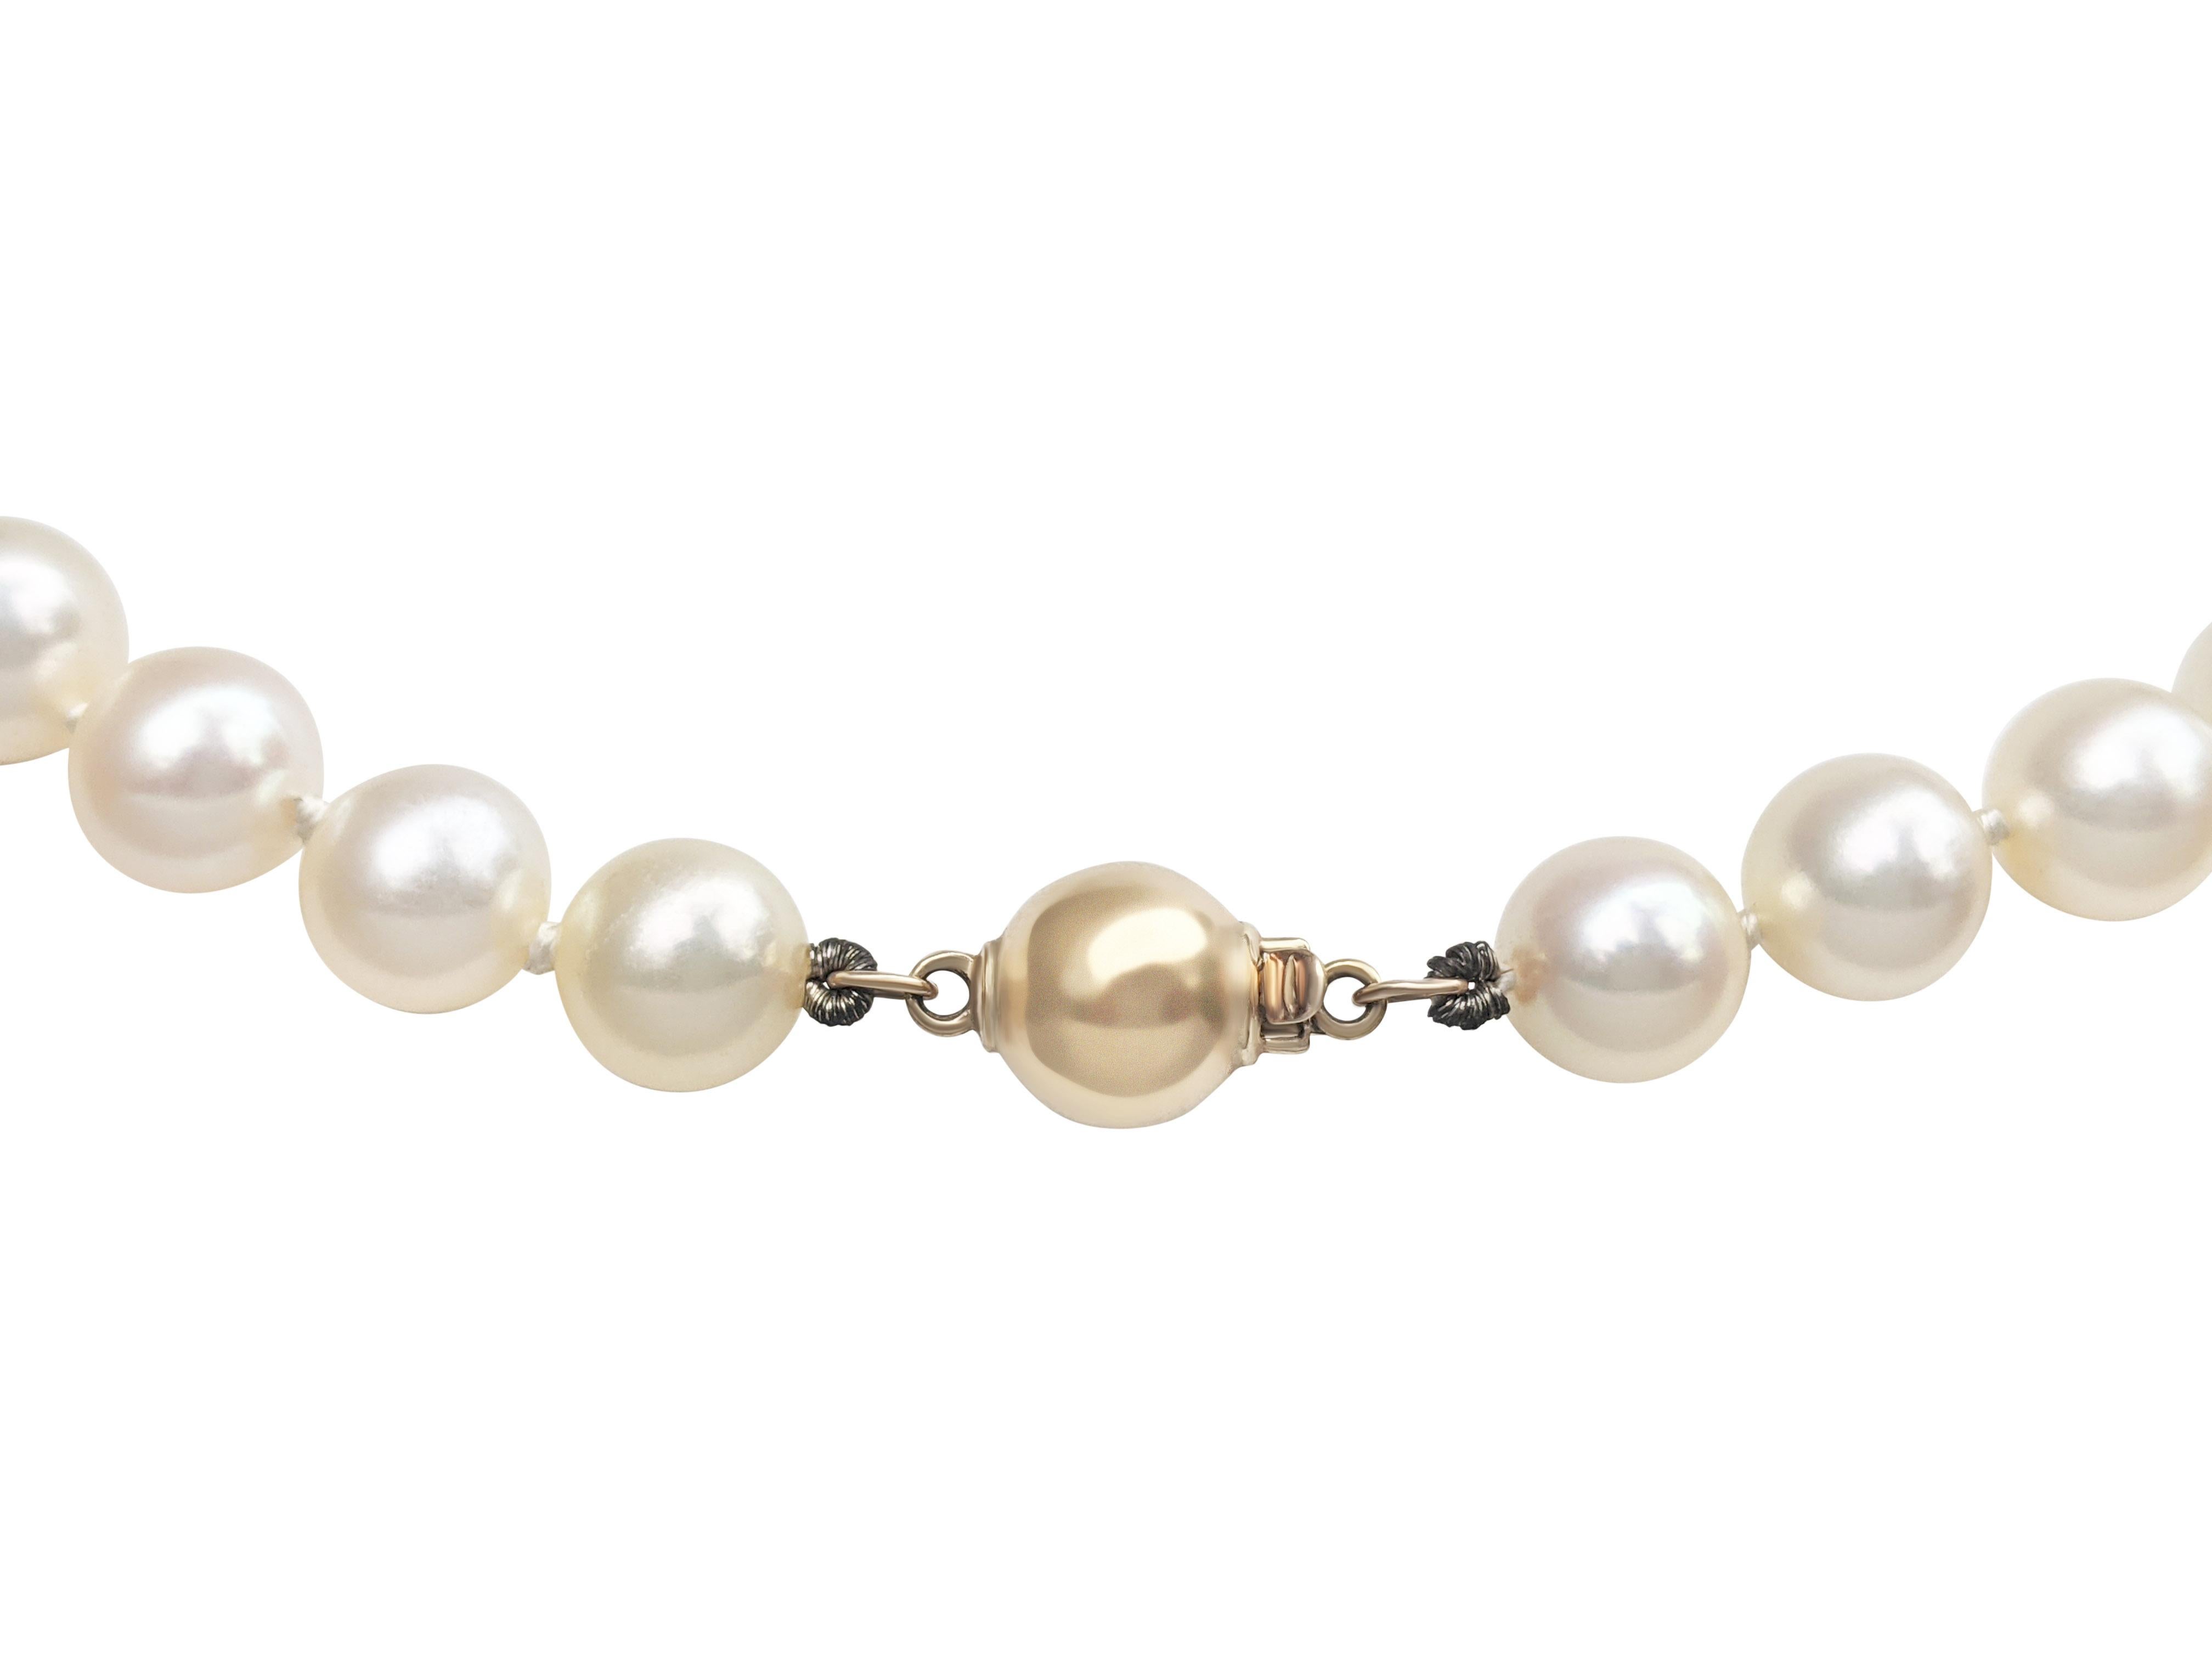 ** In Hong Kong and the USA the VAT is 0%.

53 pearls - approx. 7.5-7.7 mm
Color: Cream strand
Saltwater pearls

Item ships from Israeli Diamonds Exchange, customers are responsible for any local customs or VAT fees that might apply to the purchase.